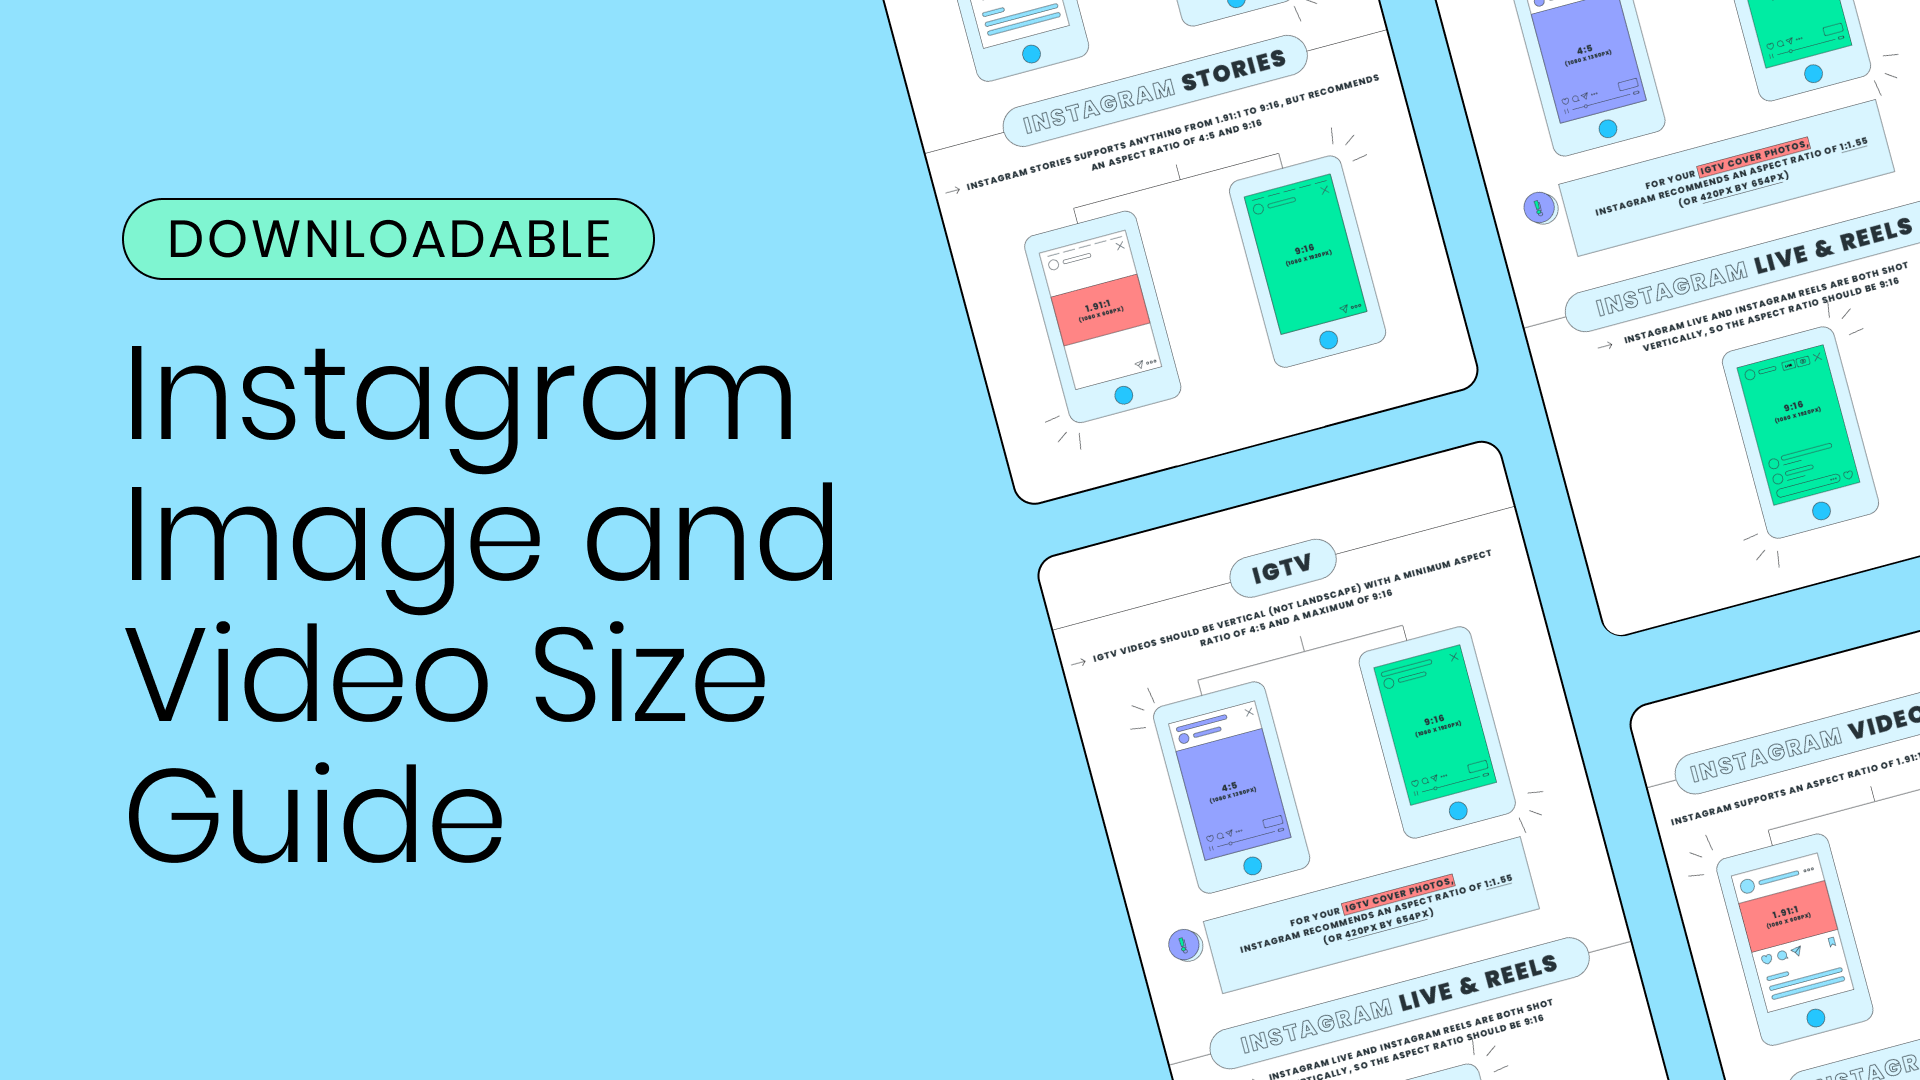 Image reading Downloadable Instagram Image and Video Size Guide with graphic of guide